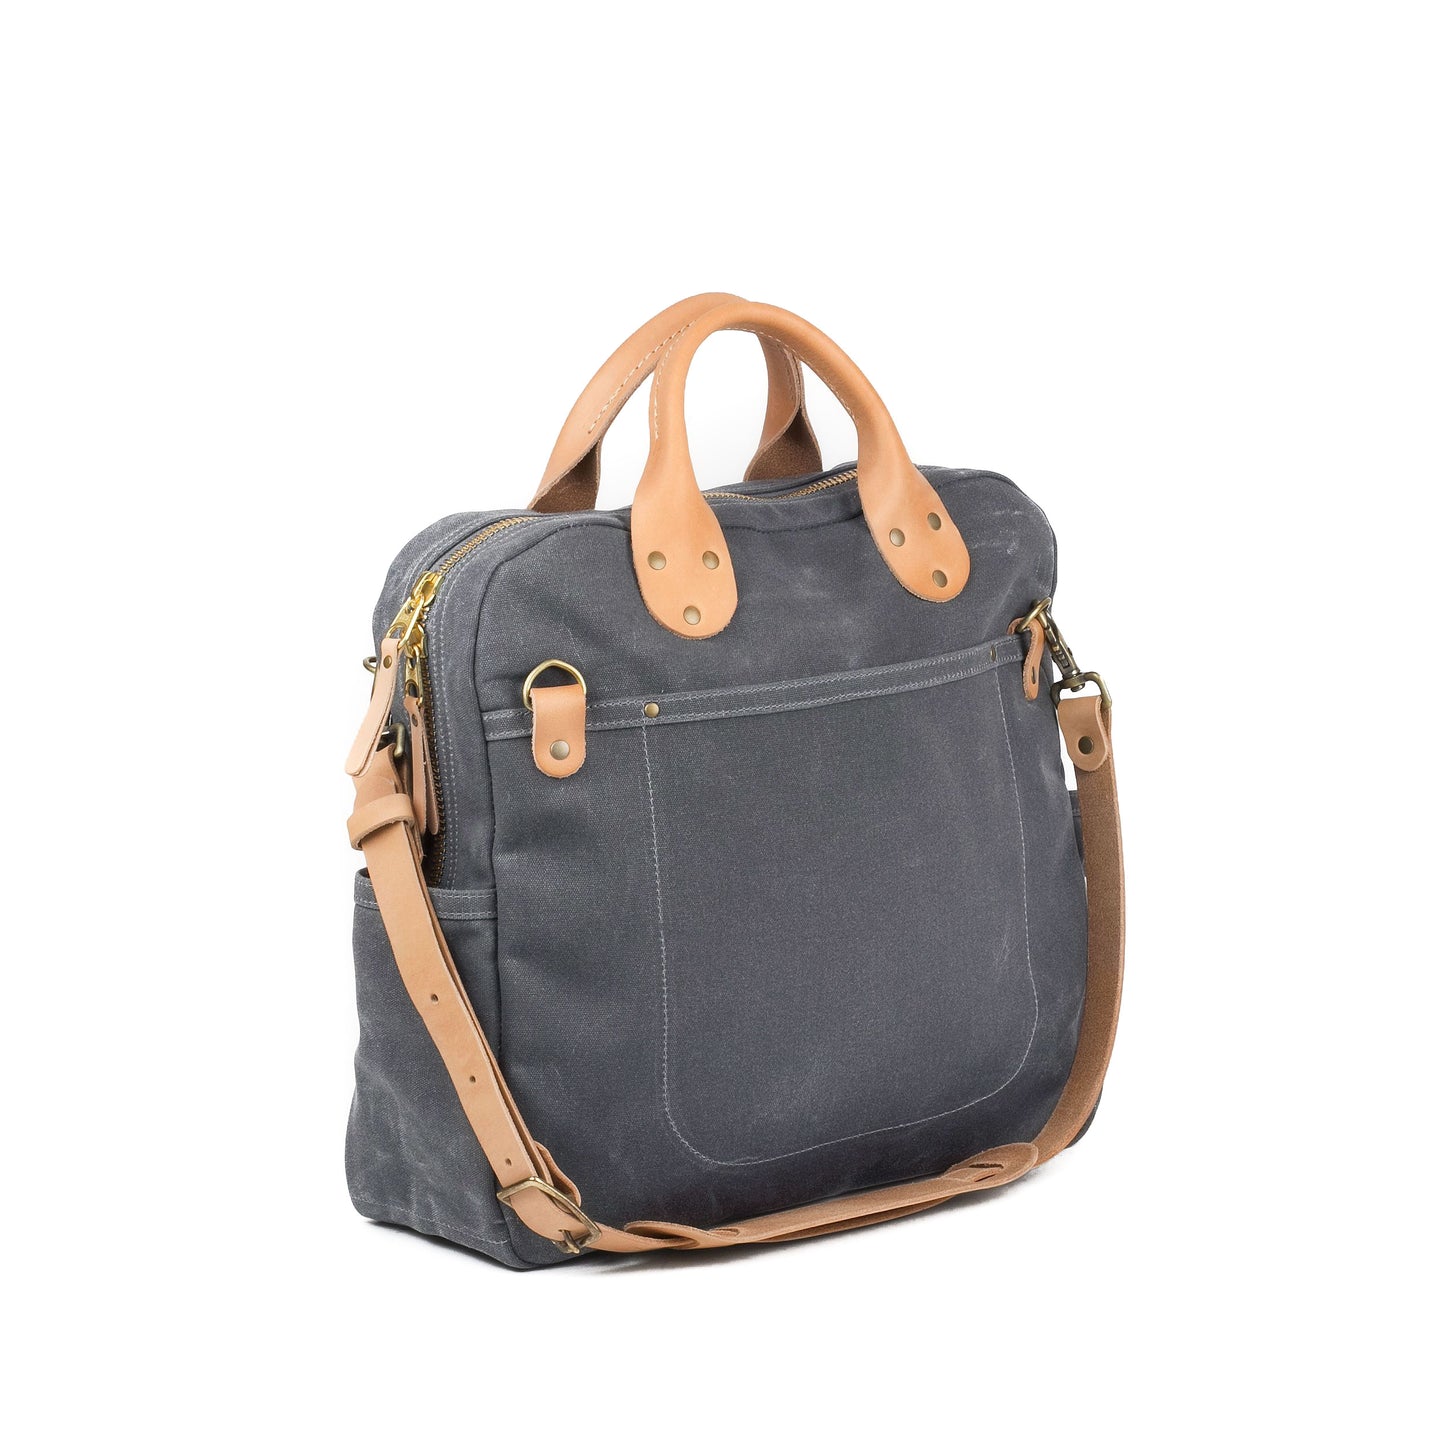 Everyday Bag Grey Waxed Canvas & Natural Leather